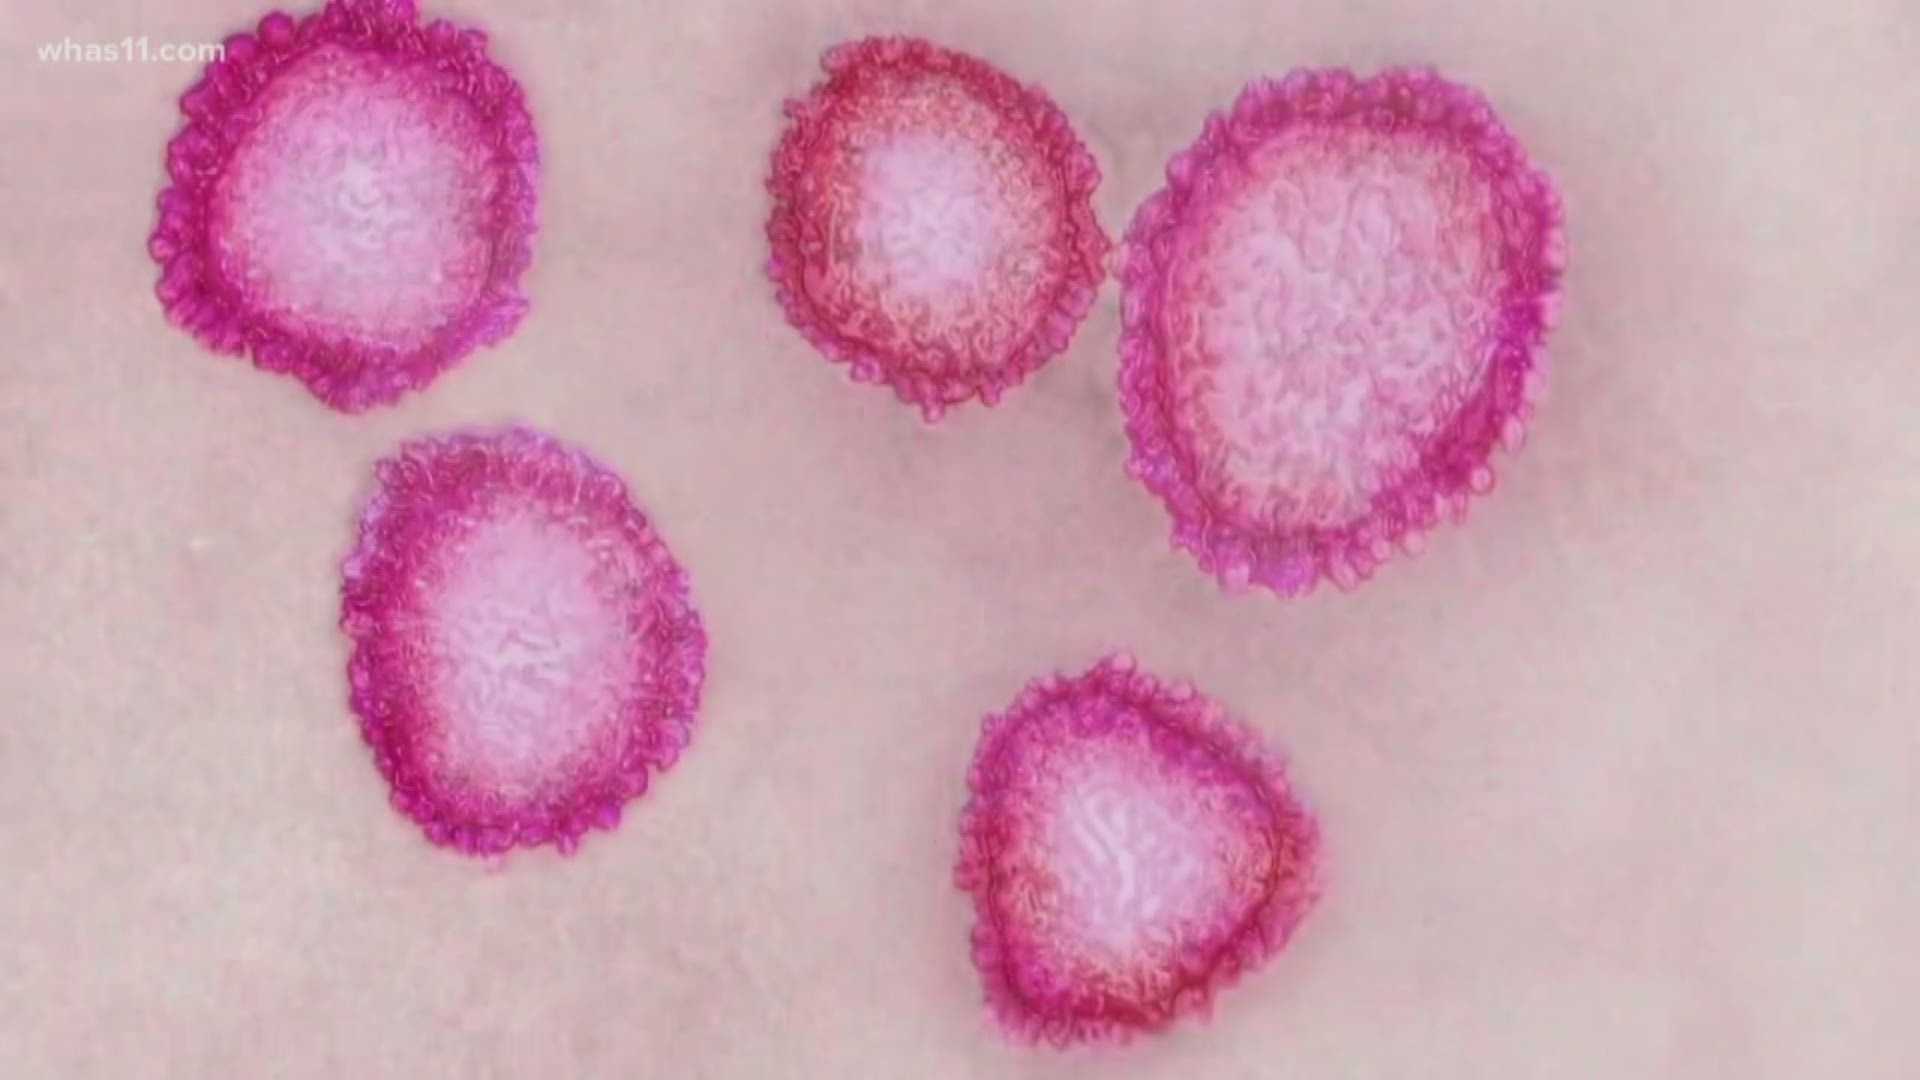 There are no confirmed cases in Indiana, but at least 30 people are being tested for the virus right now.